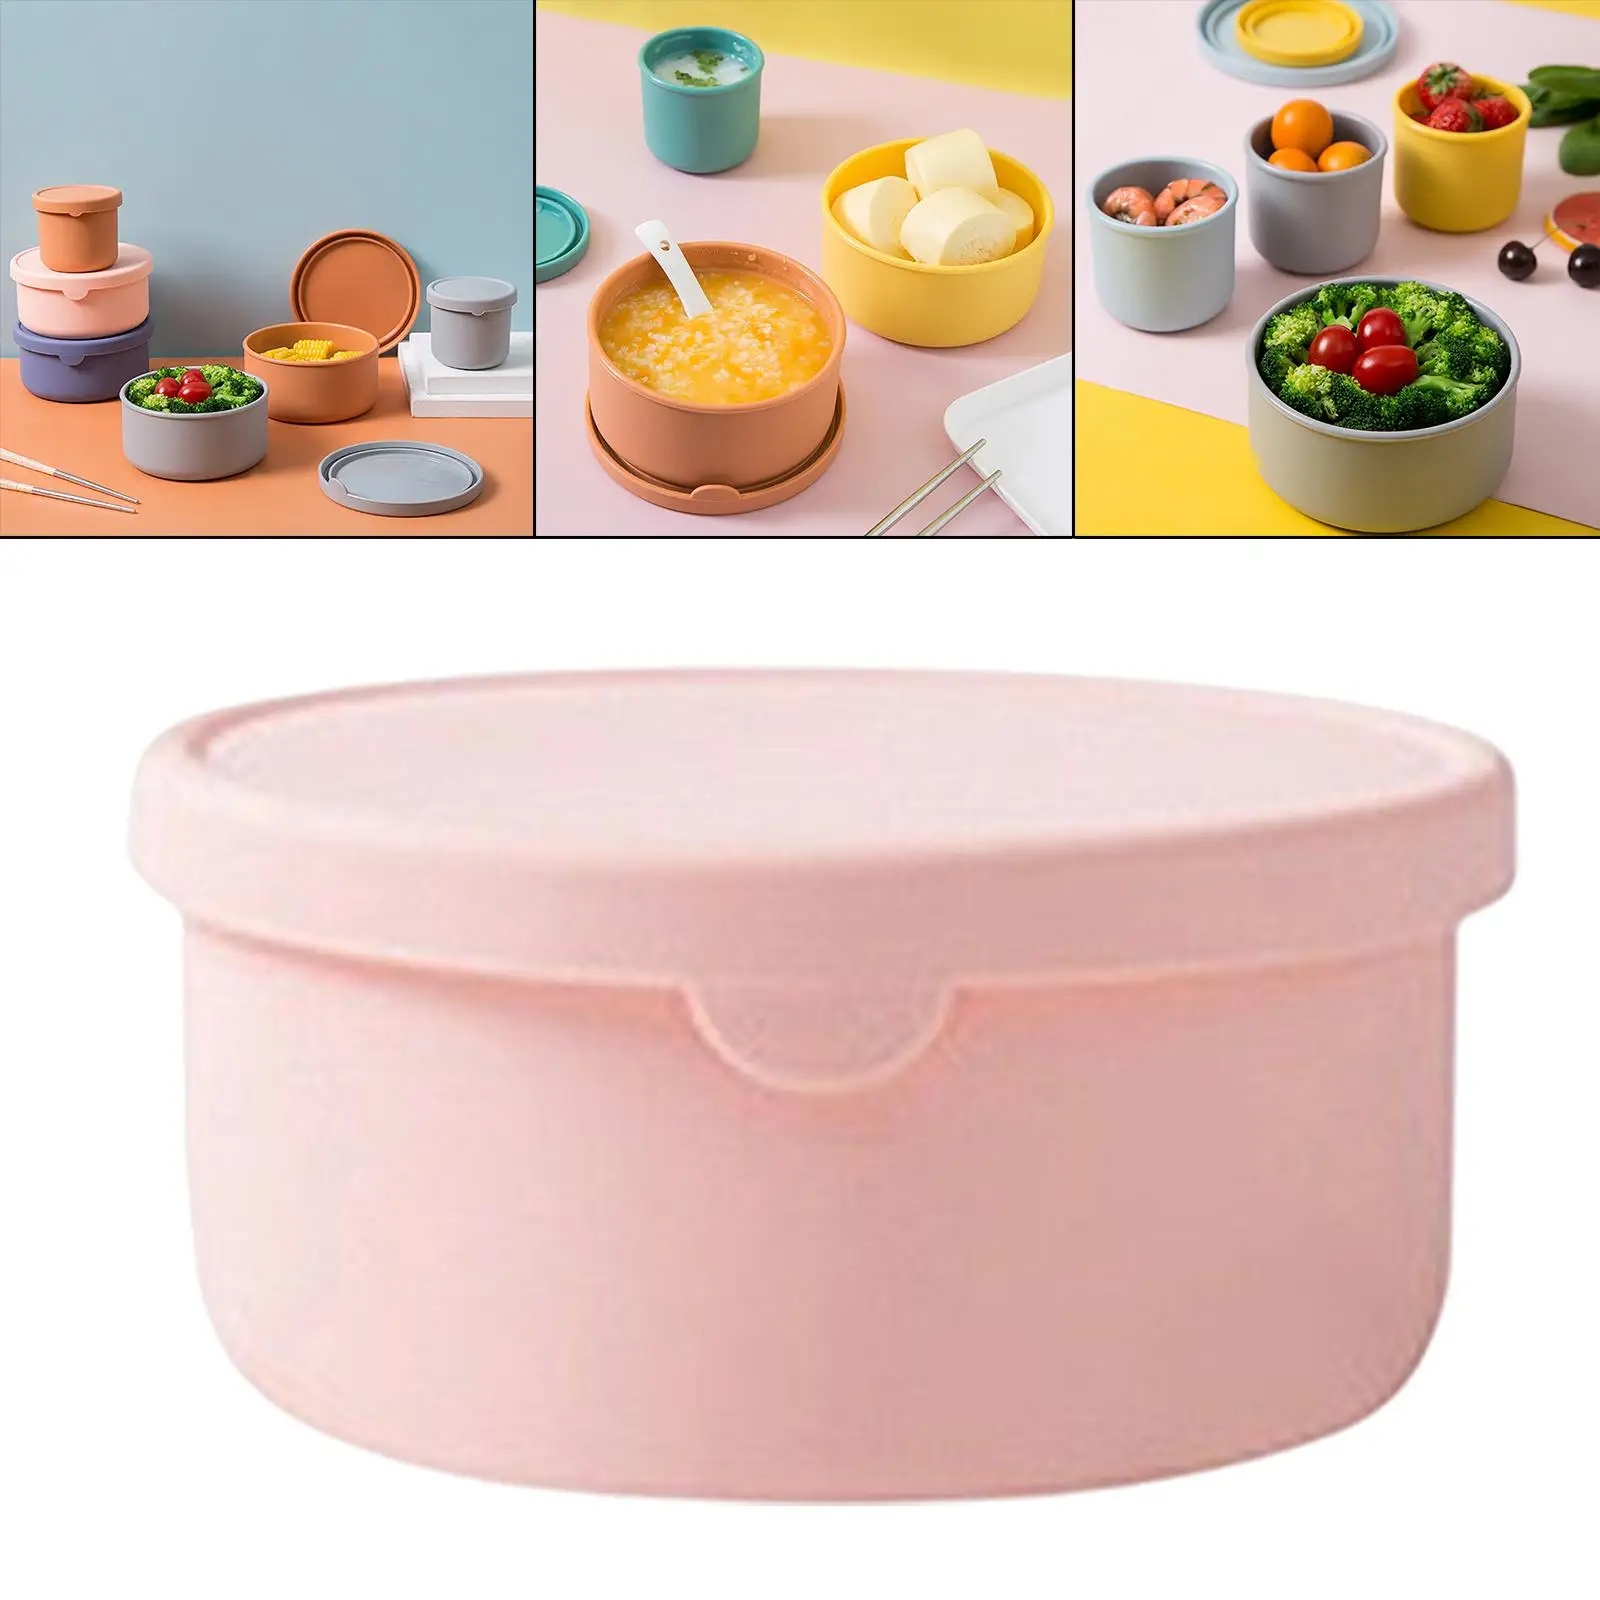 Hard Silicone Box for Lunch Leakproof Round with Lid Storage Bento Food Container Portable Single Color for Microwave